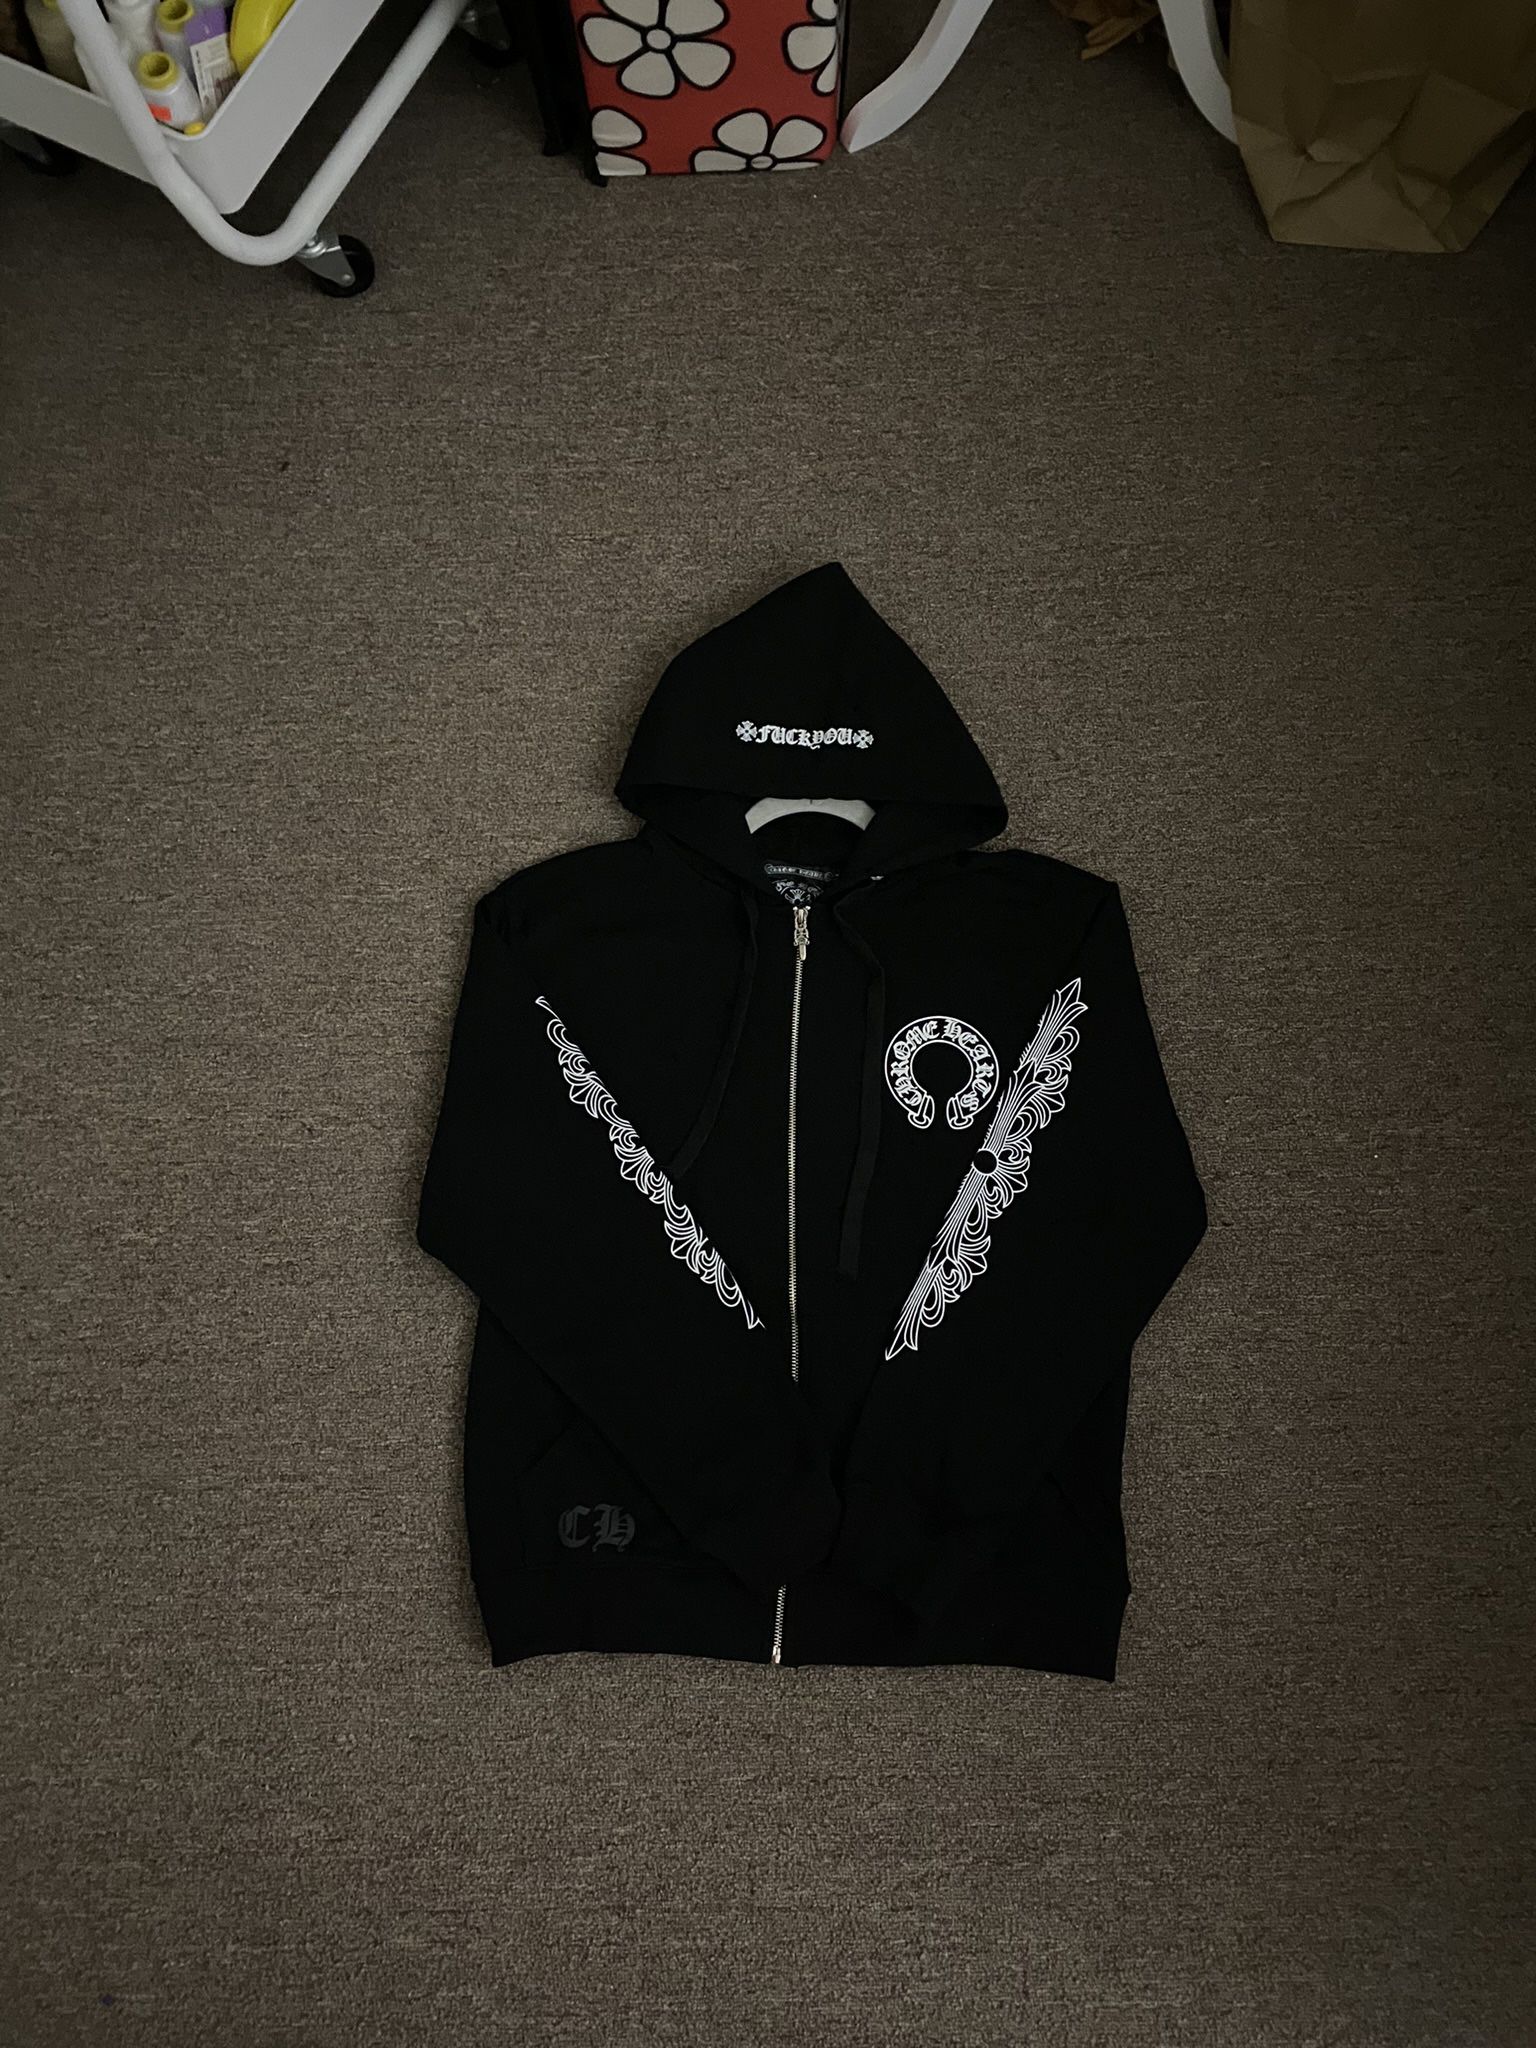 Chrome Hearts ‘F*** You” Floral Horseshoe Zip Up Hoodie